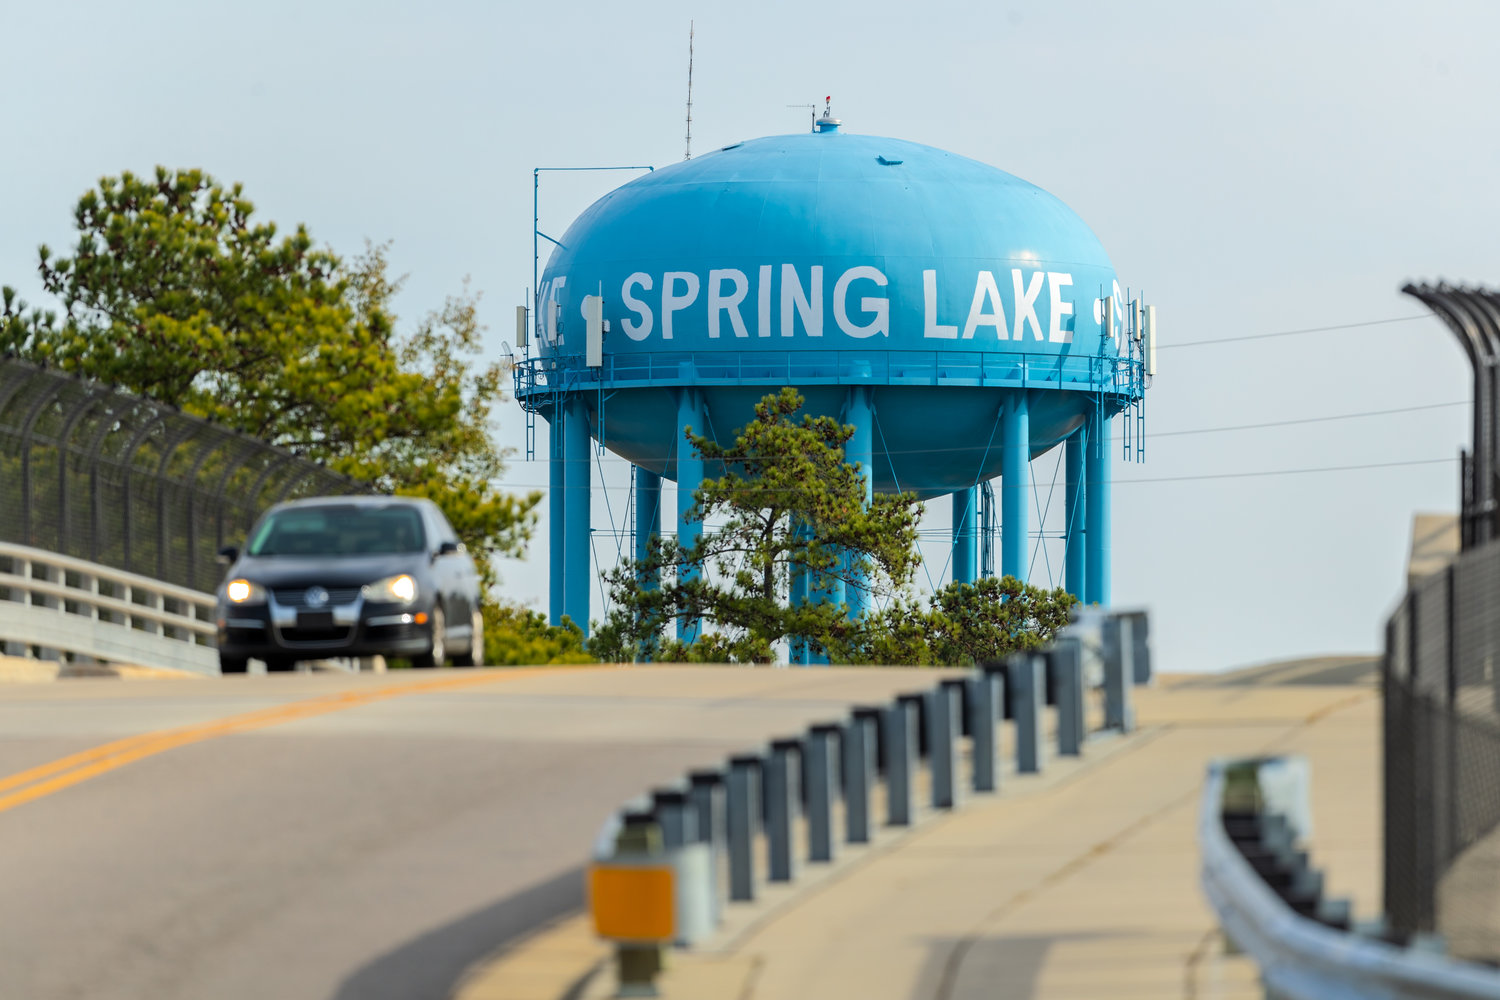 The Spring Lake Board of Aldermen voted 3-2 Monday to accept an extension agreement among Cumberland County municipalities to delay implementation of a sales tax distribution method for a year.